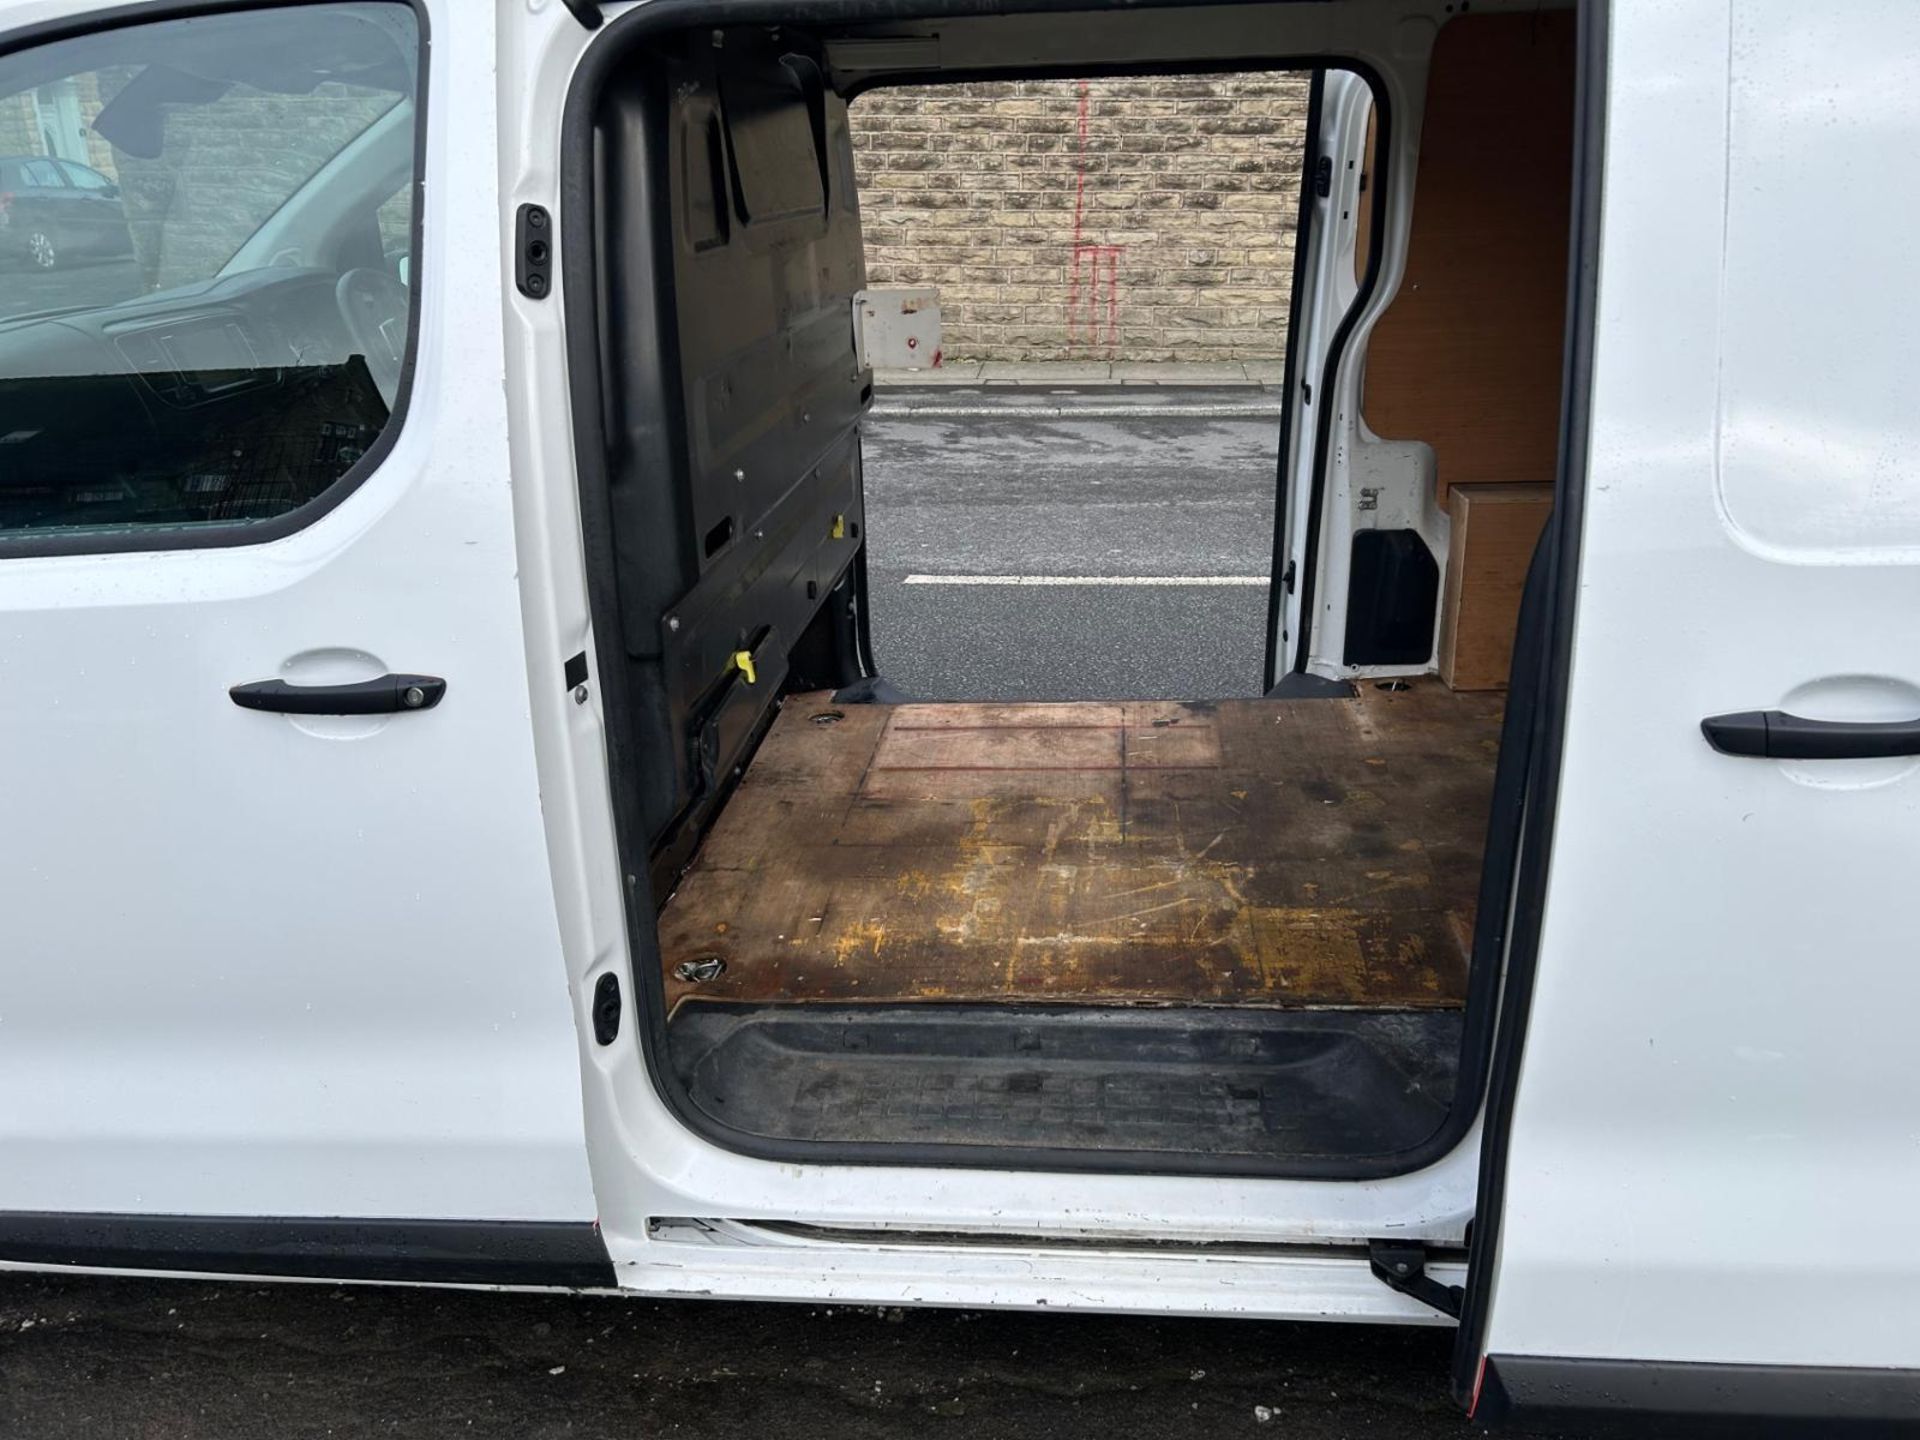 2019 CITROEN DISPATCH - 124K MILES - HPI CLEAR - READY TO GO ! - Image 7 of 12